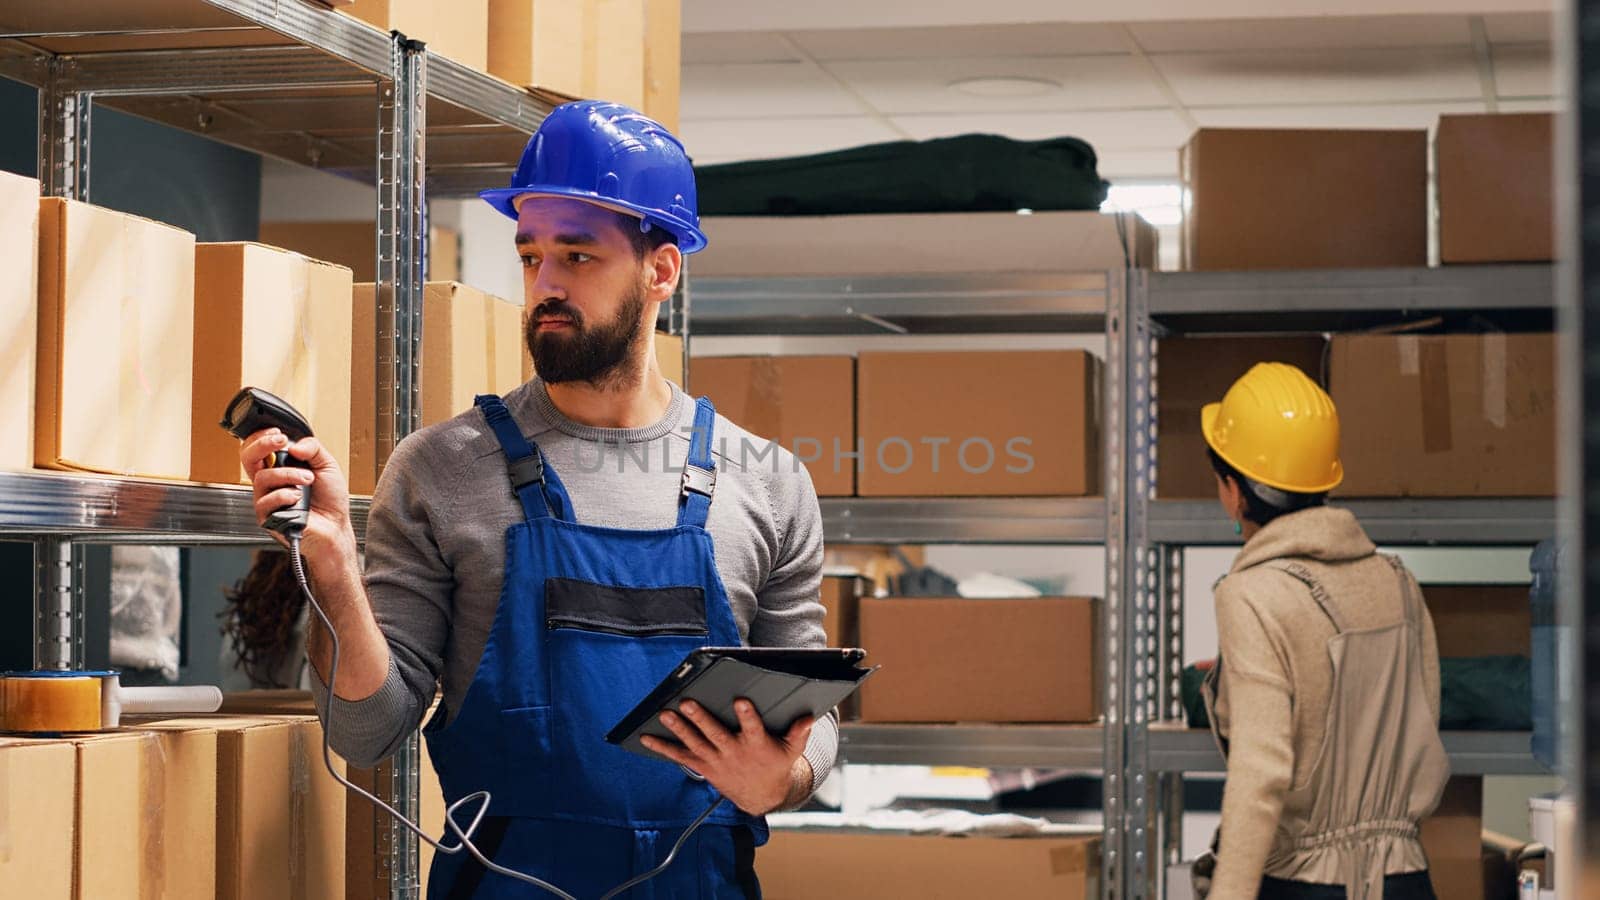 Young adult scanning barcodes on boxes in warehouse, pointing scanner at cardboard packages with goods and checking stock. Depot employee holding device in storage room, industrial job.